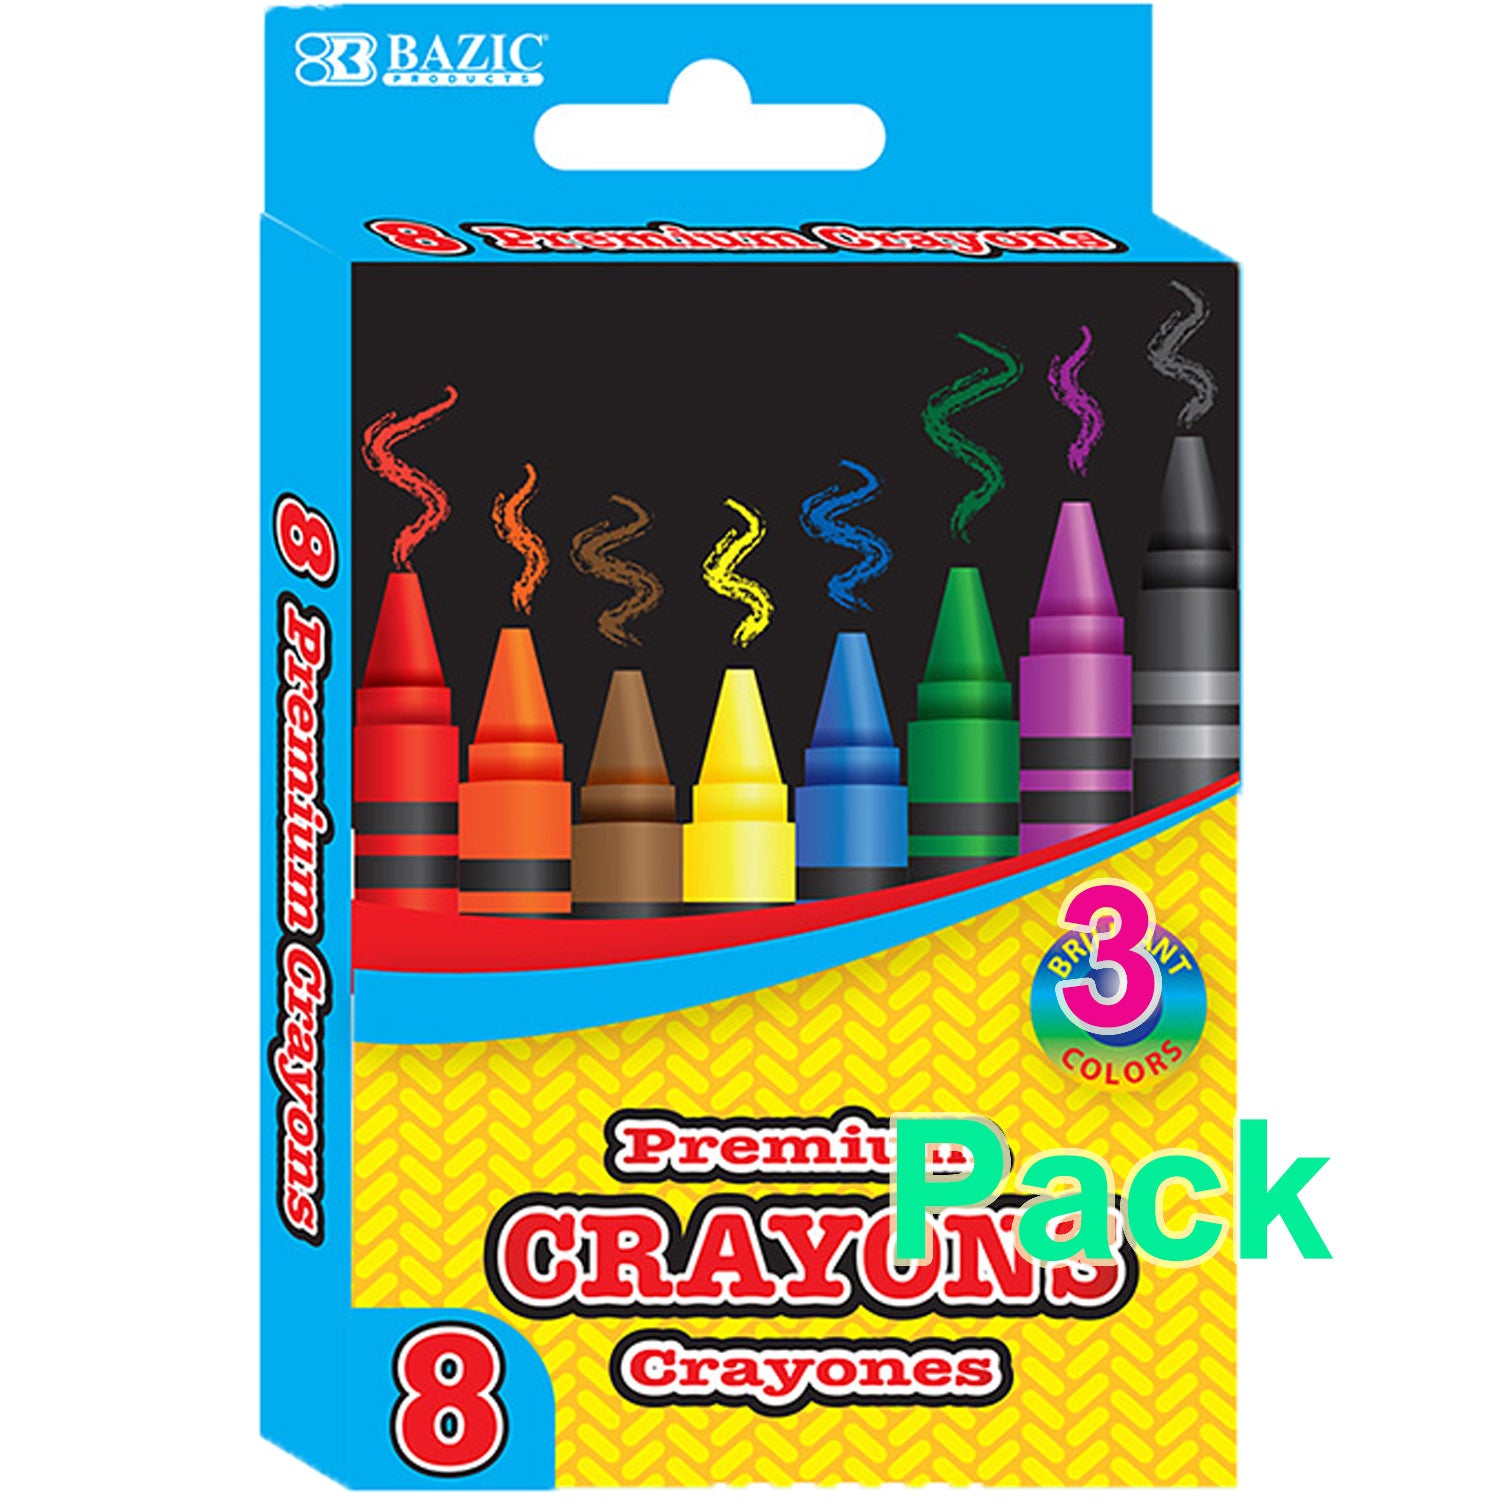 Premium Crayons Coloring Set - 8-Count - 3-Pack - G8 Central